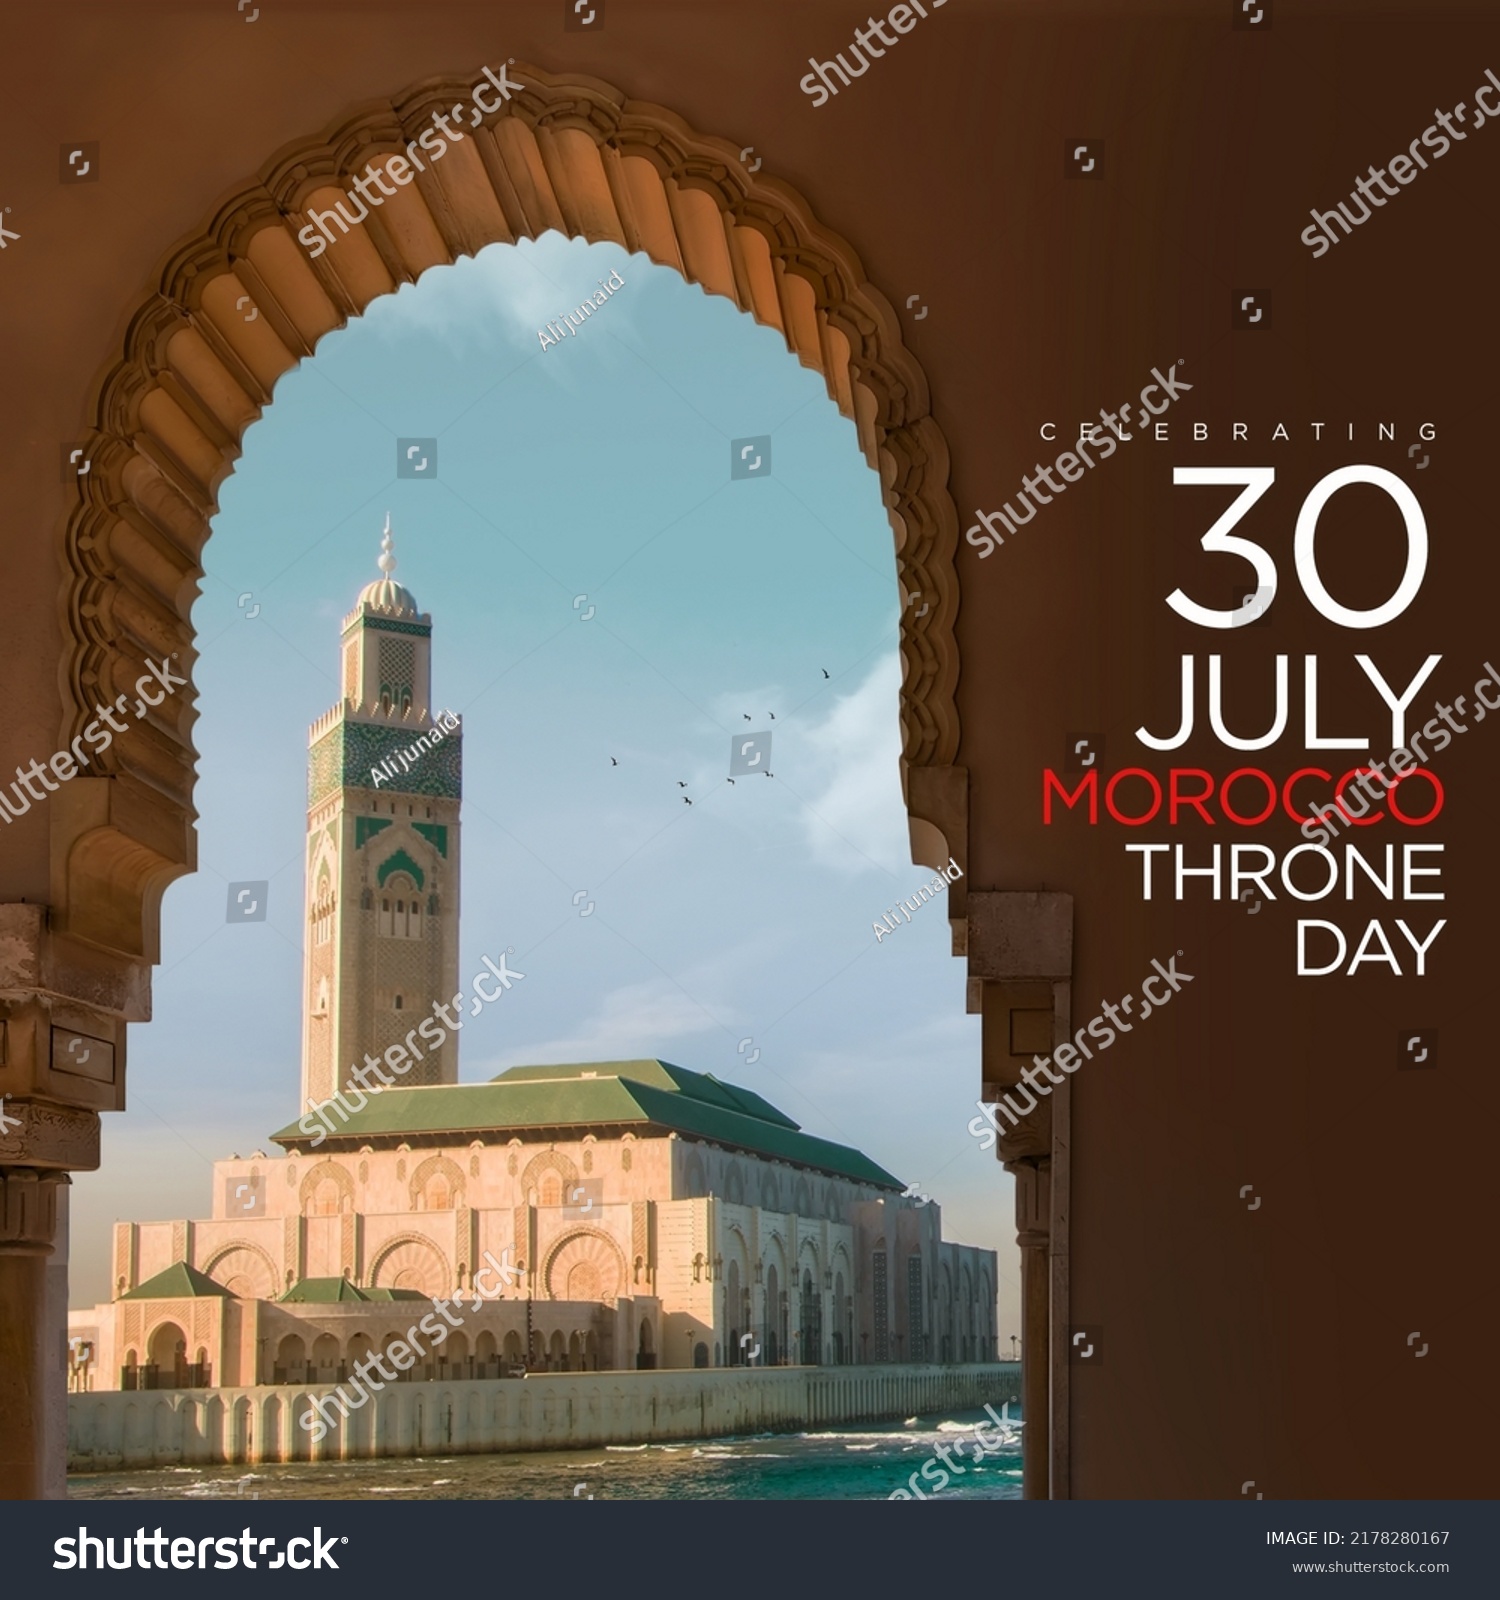 Morocco Throne Day poster on a cloudy, grungy and blurred background. 30 July #2178280167